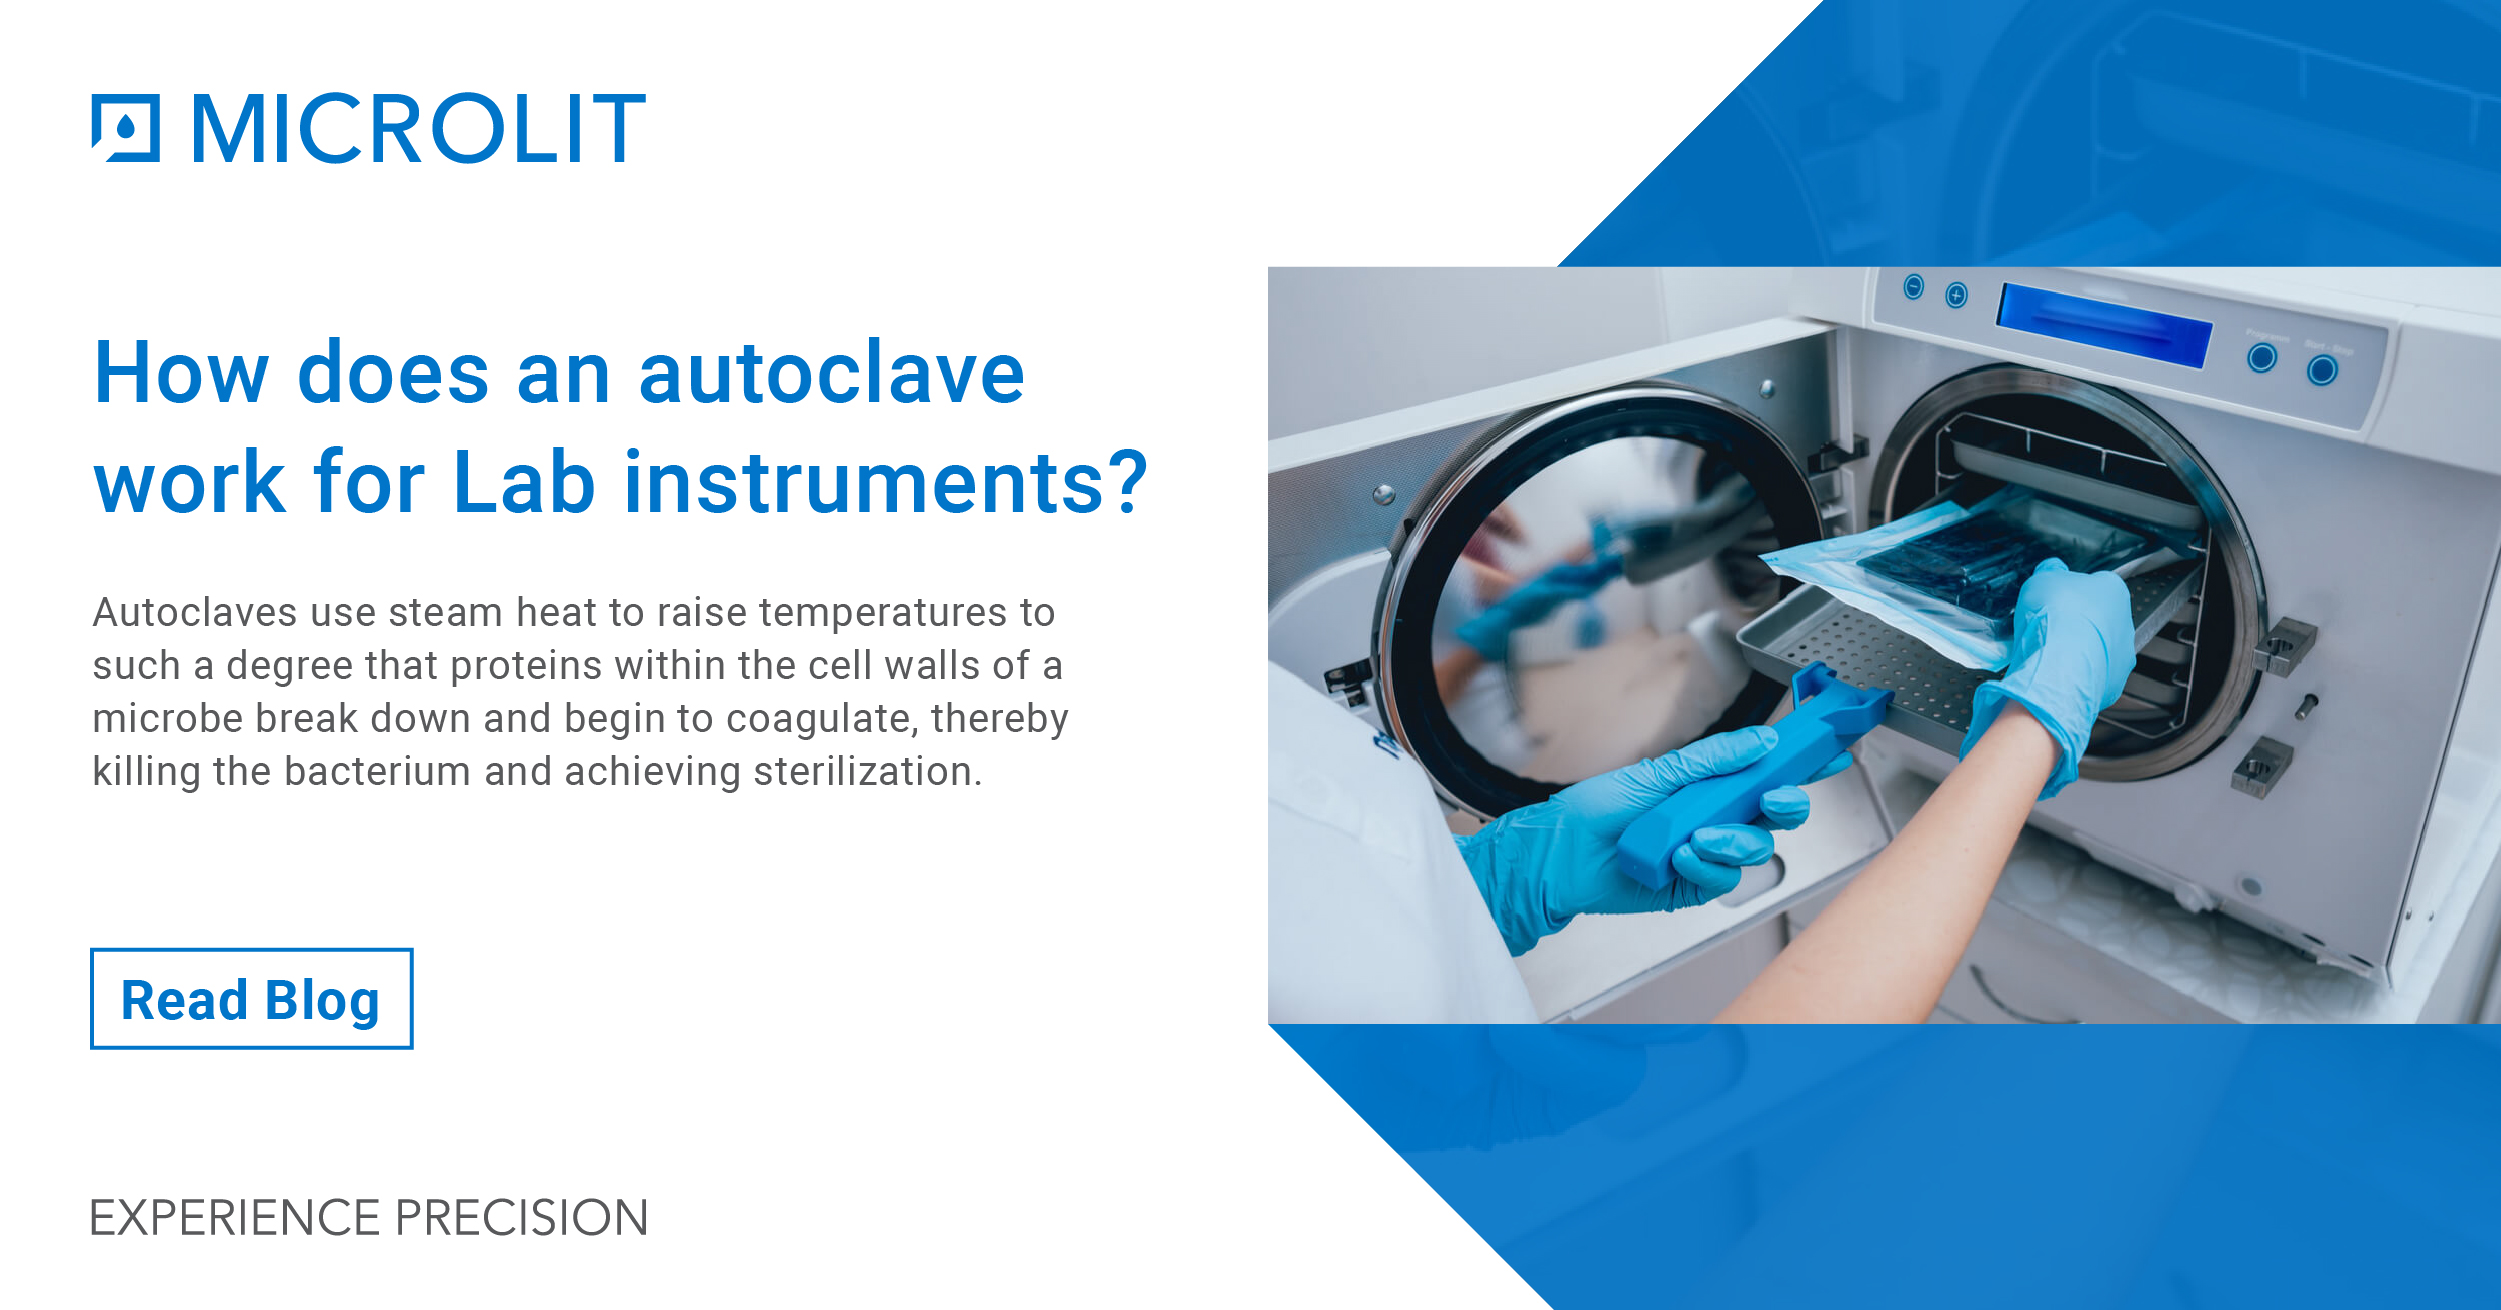 How does an autoclave work for Lab instruments?